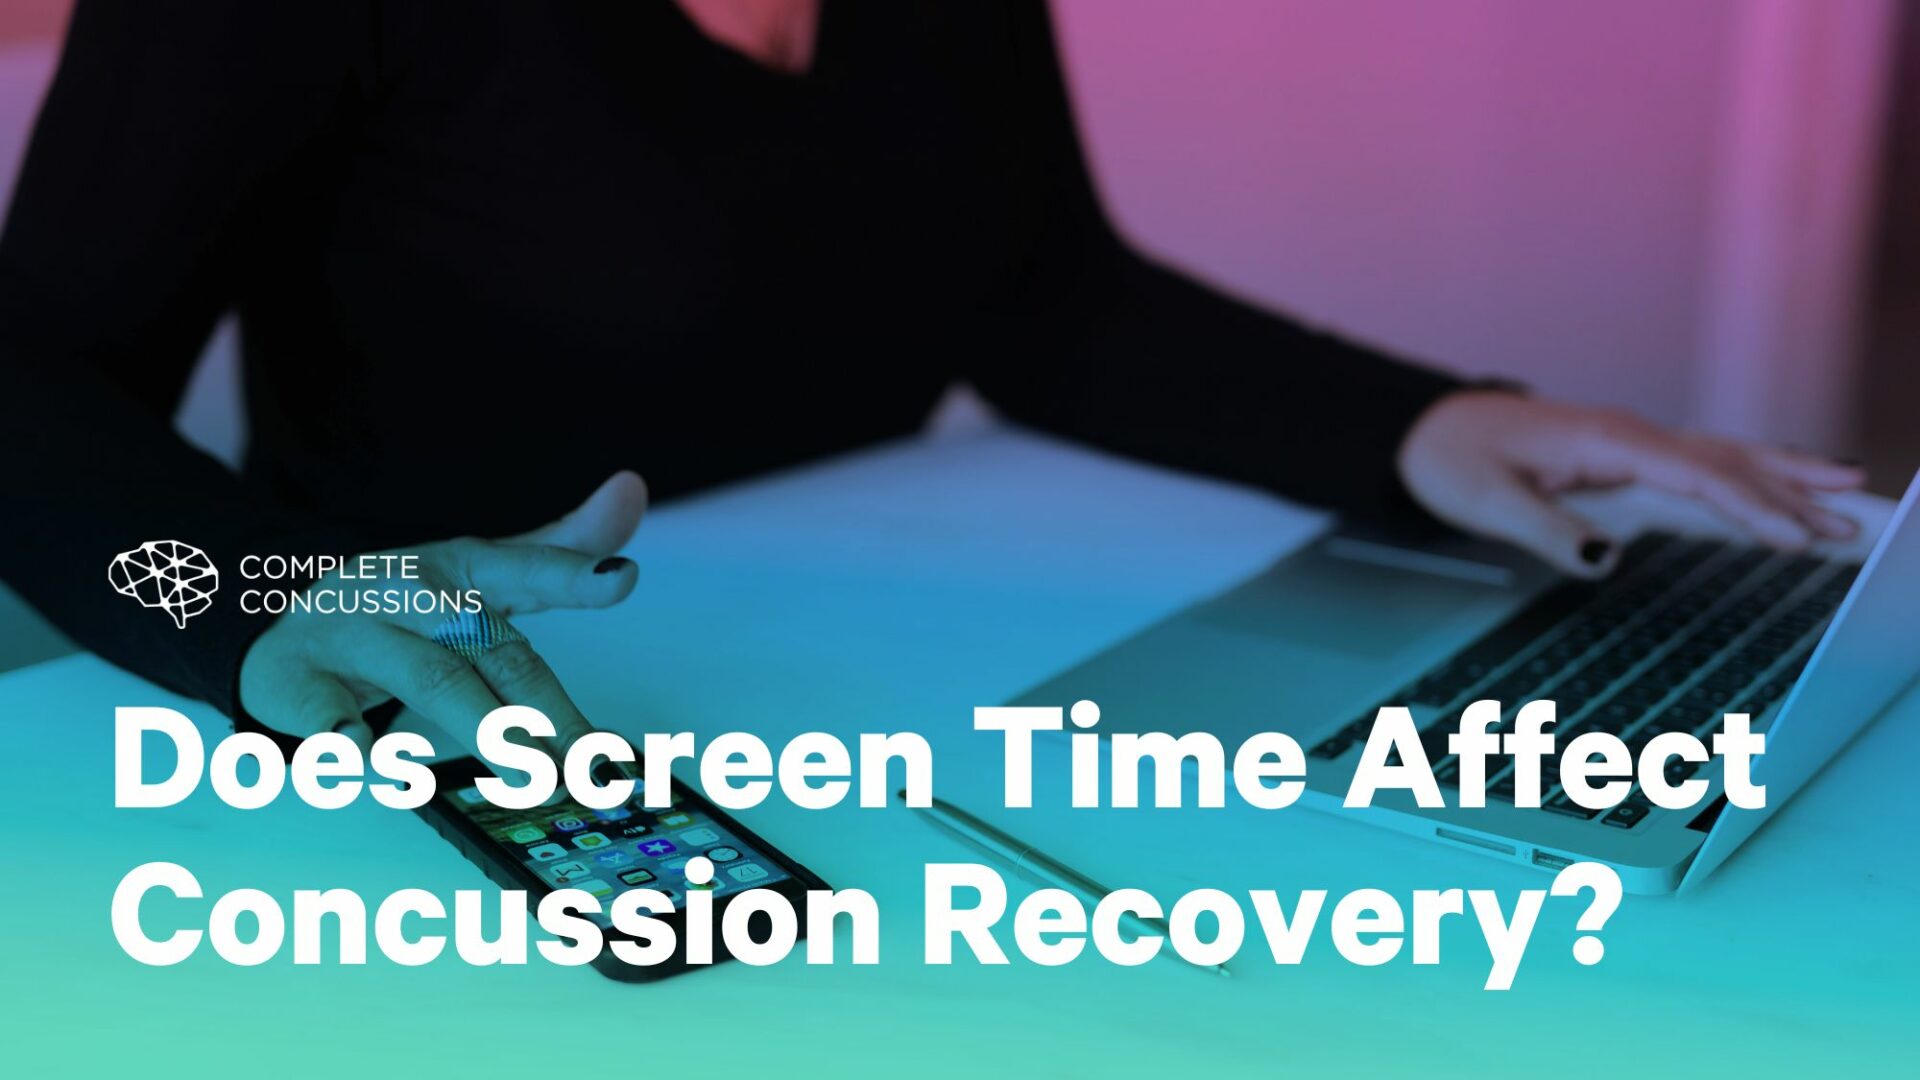 Does Screen Time Affect Concussion Recovery?